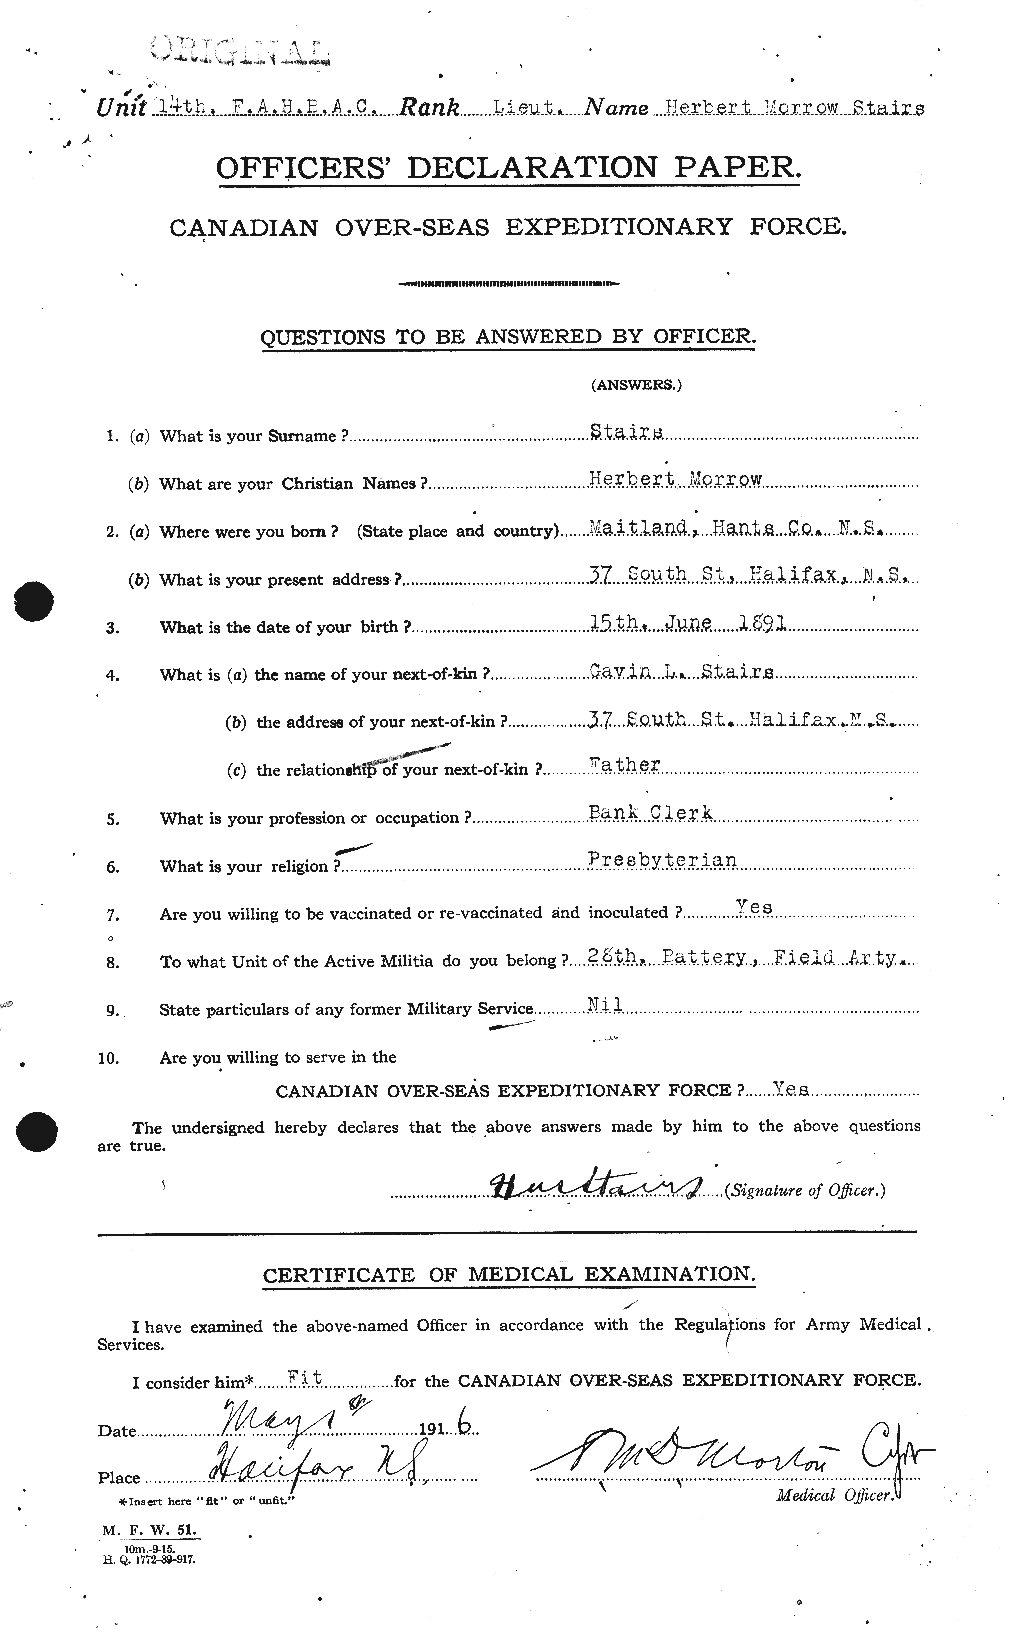 Personnel Records of the First World War - CEF 116804a